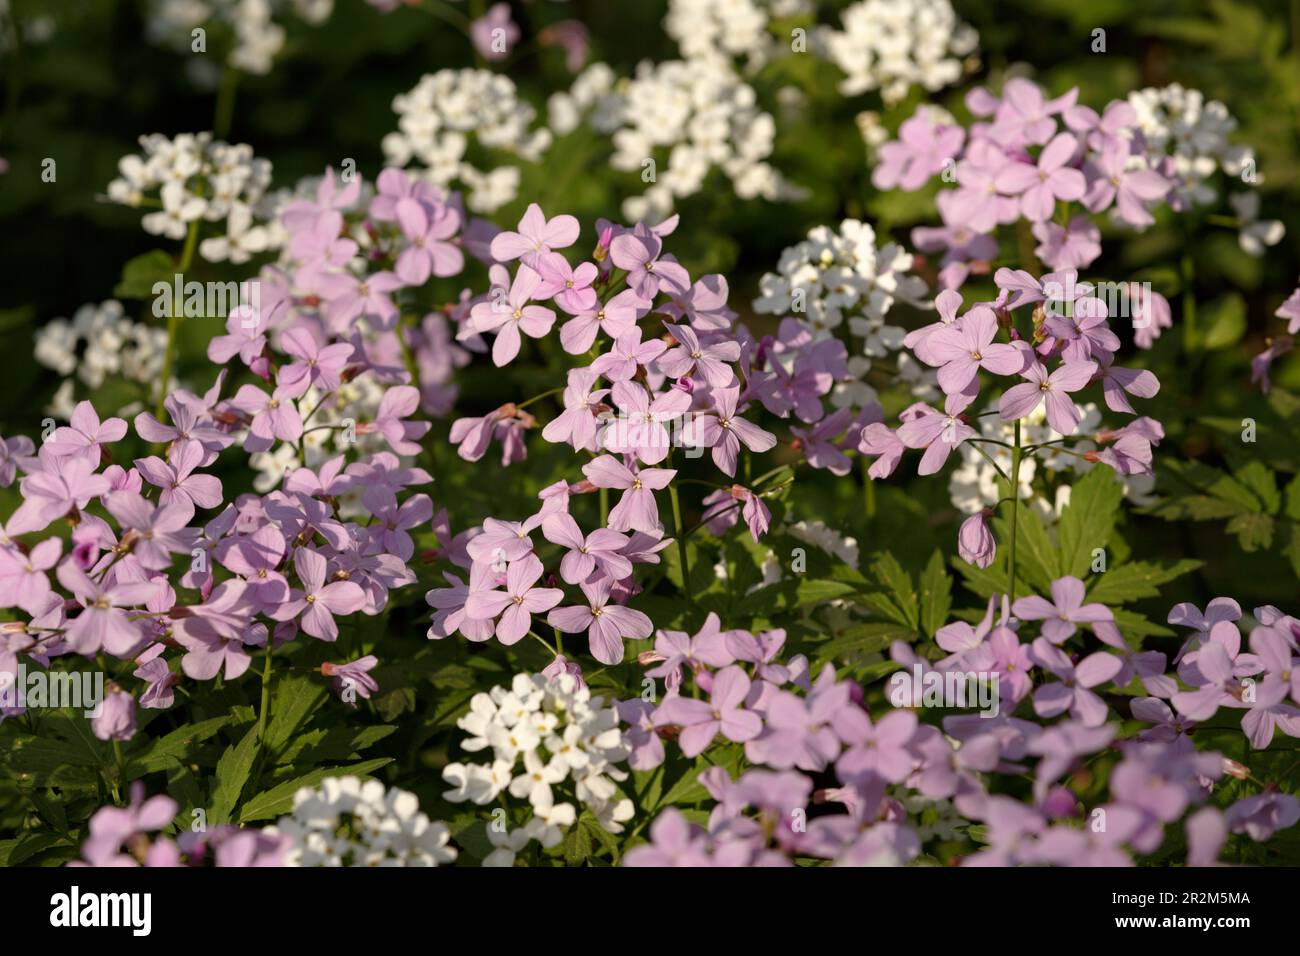 Pink and white Arabis caucasica. Arabis alpina, mountain rockcress or alpine rock cress. White arabis caucasica flowers growing in the forest. Floral Stock Photo